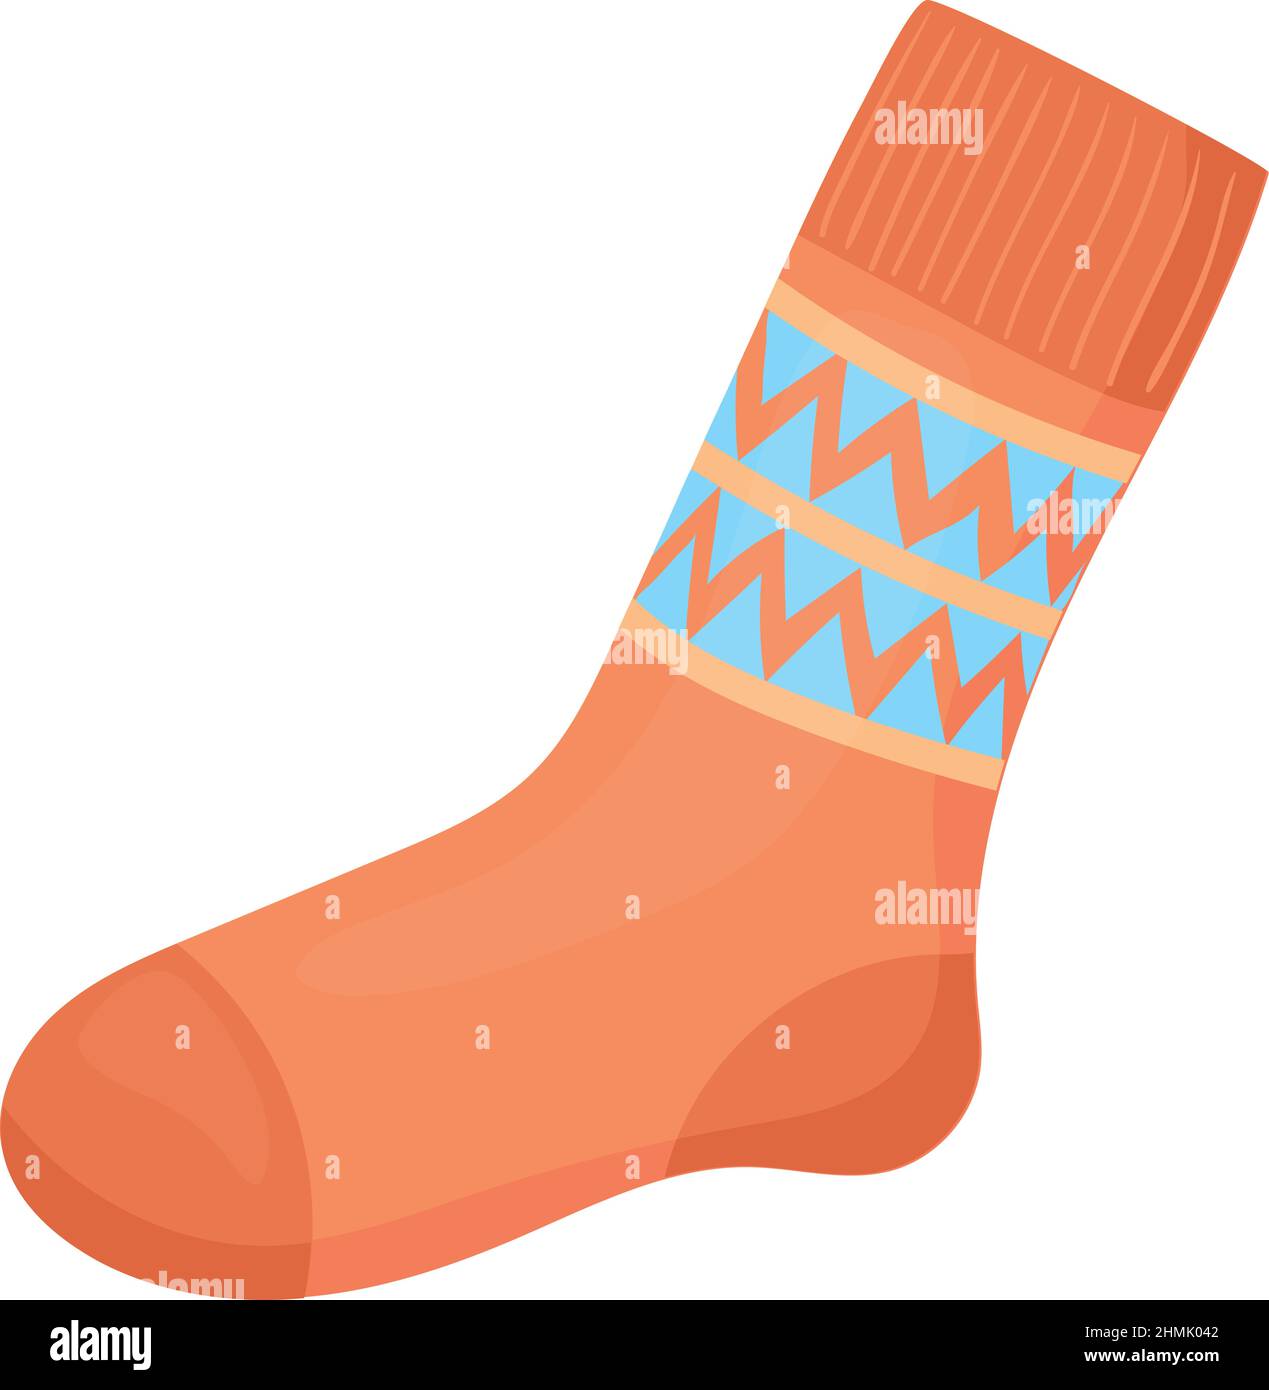 High sock icon. Casual warm cartoon footwear isolated on white background Stock Vector